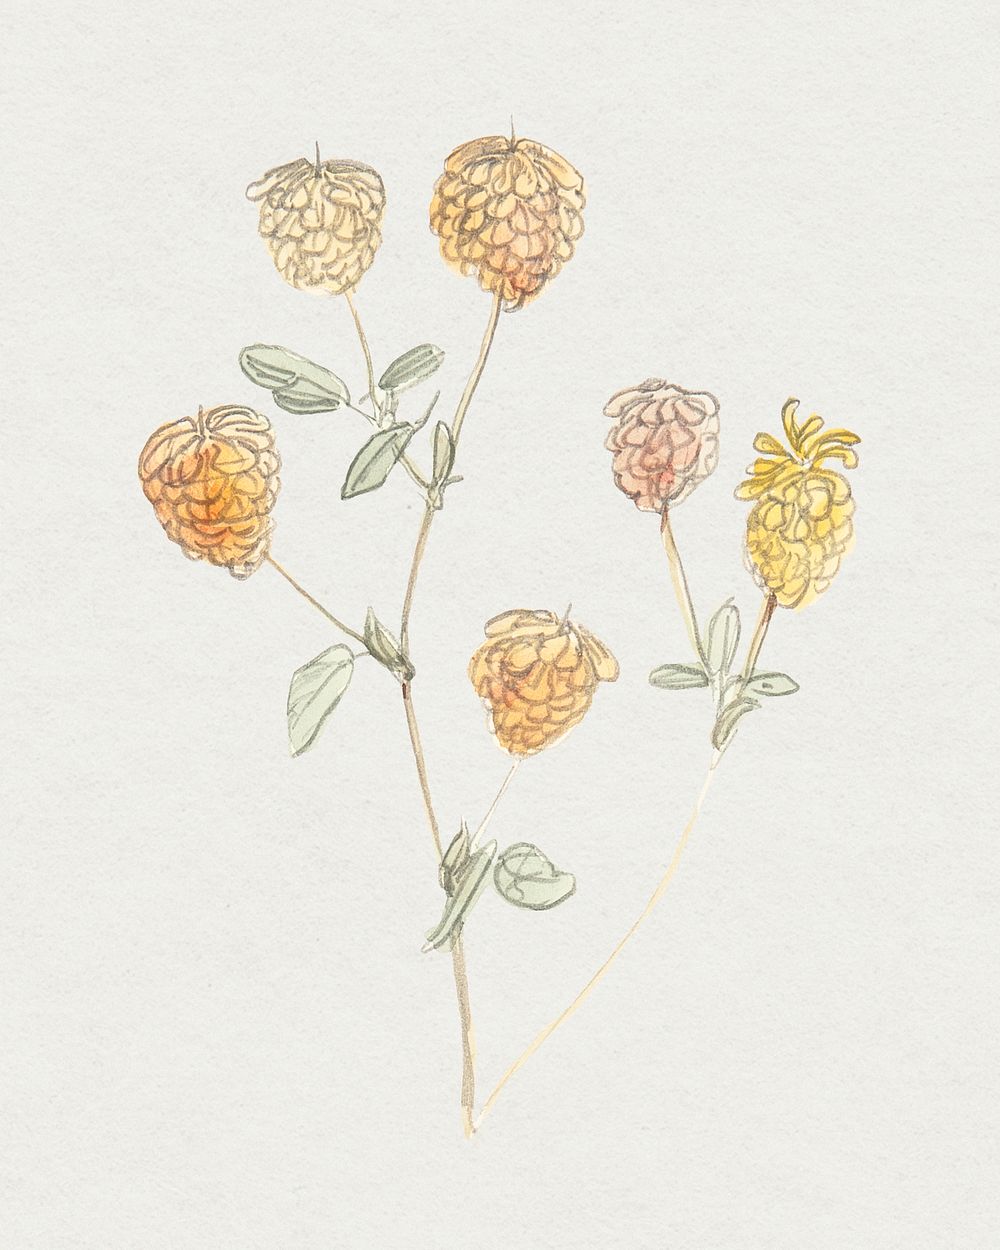 Vintage flower psd in hand drawn meadow flowers, remixed from artworks by Samuel Colman